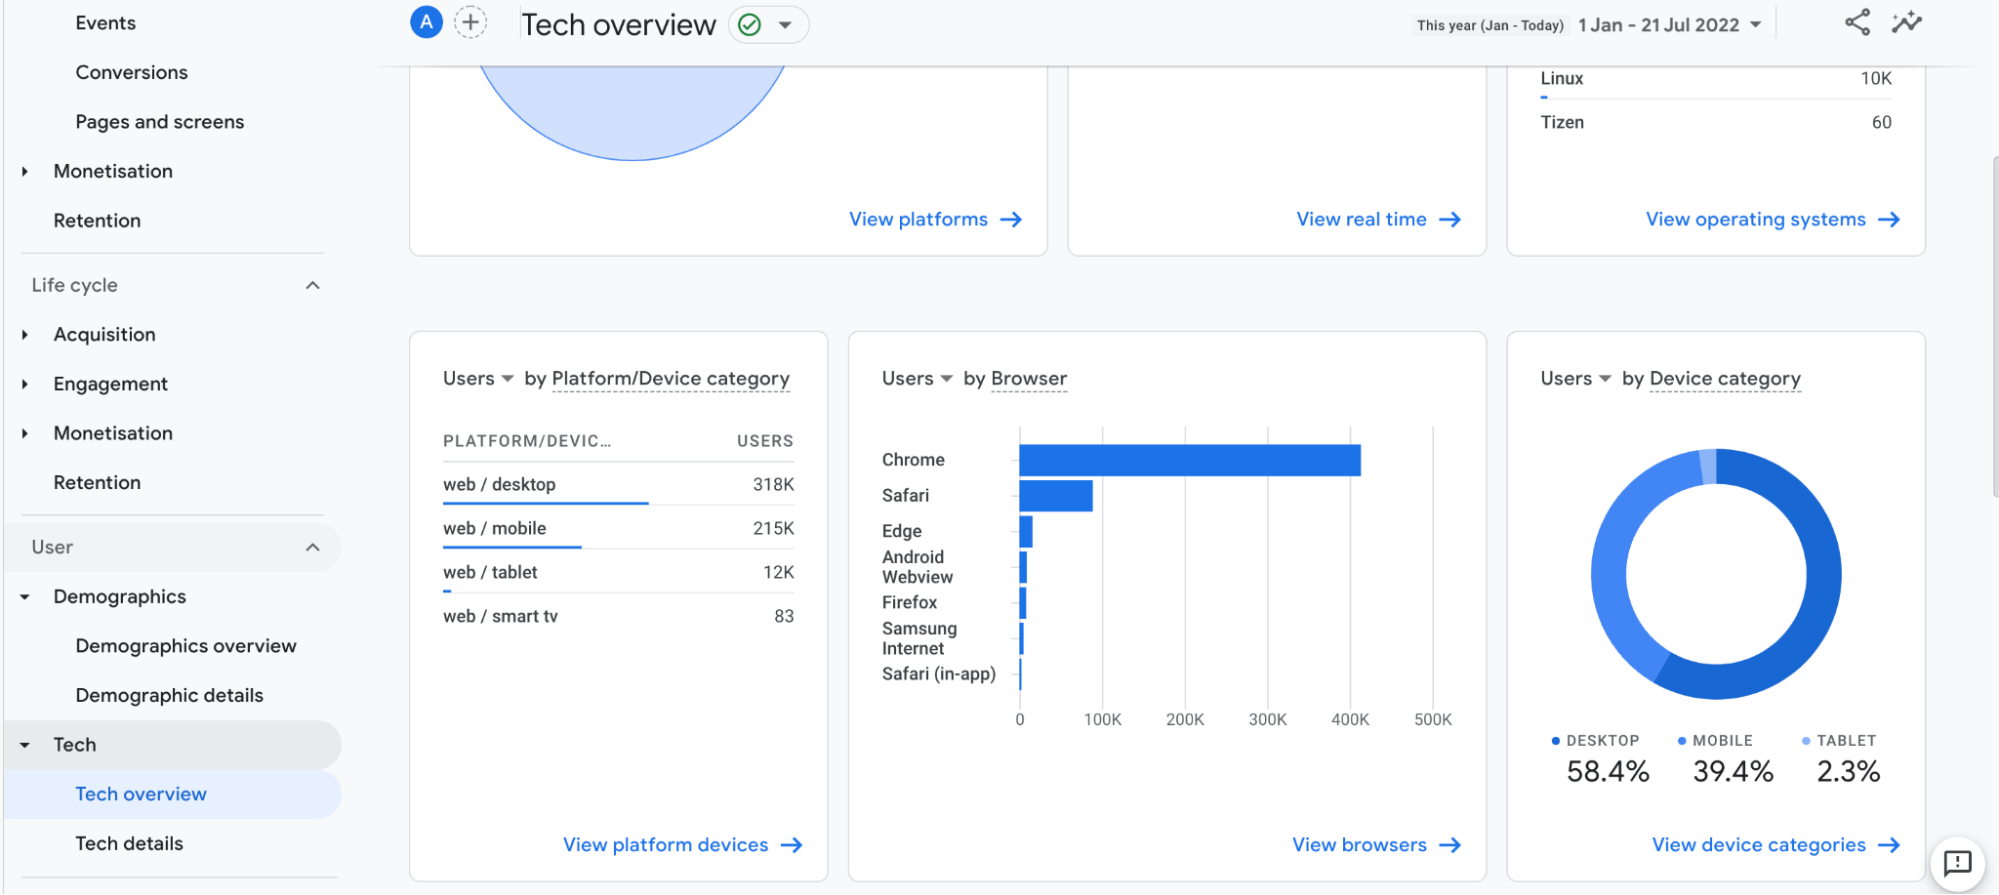 A screenshot of the Google Analytics Tech Overview report showing which devices most users are using to browse the website.